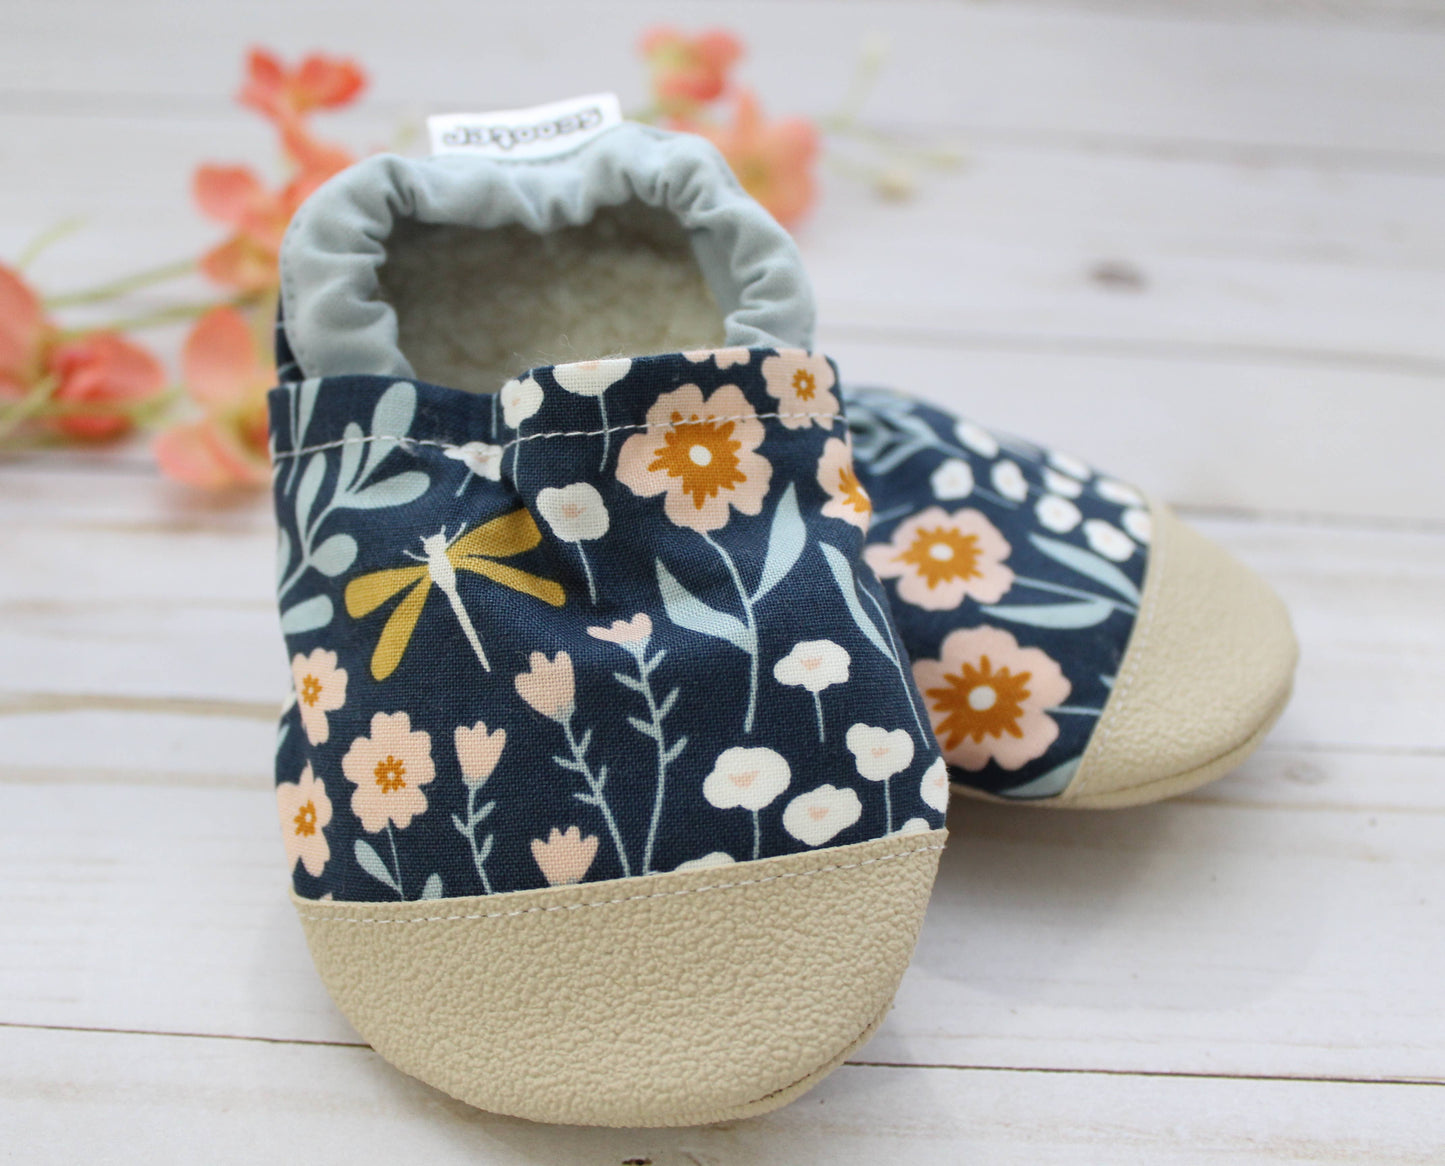 Scooter Booties - Dragonfly Lake Baby Shoes